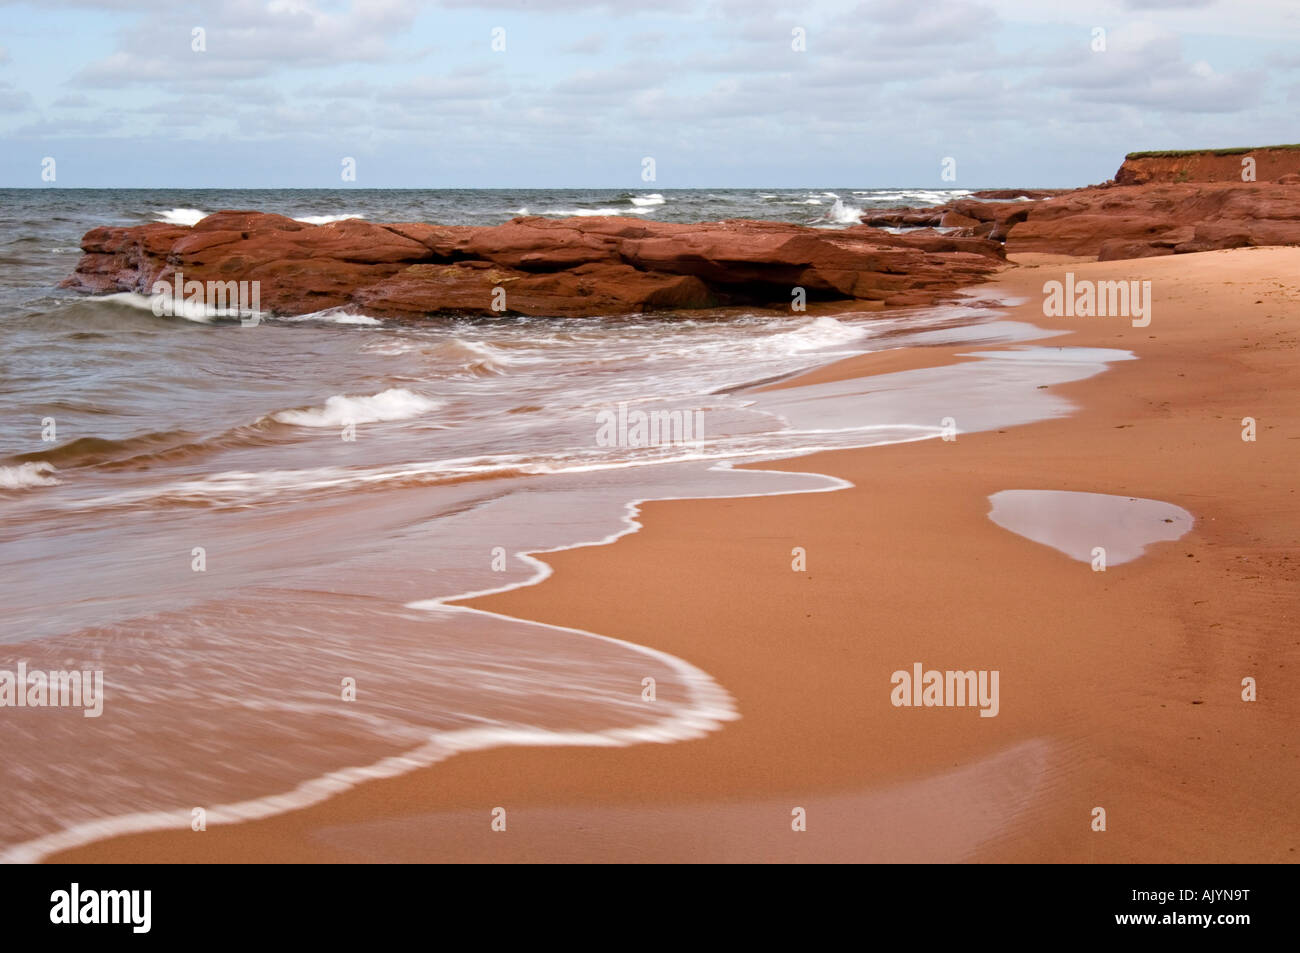 Red rocks and surf along Campbell's Cove beach, Campbell's Cove, PE/PEI Prince Edward Island, Canada Stock Photo